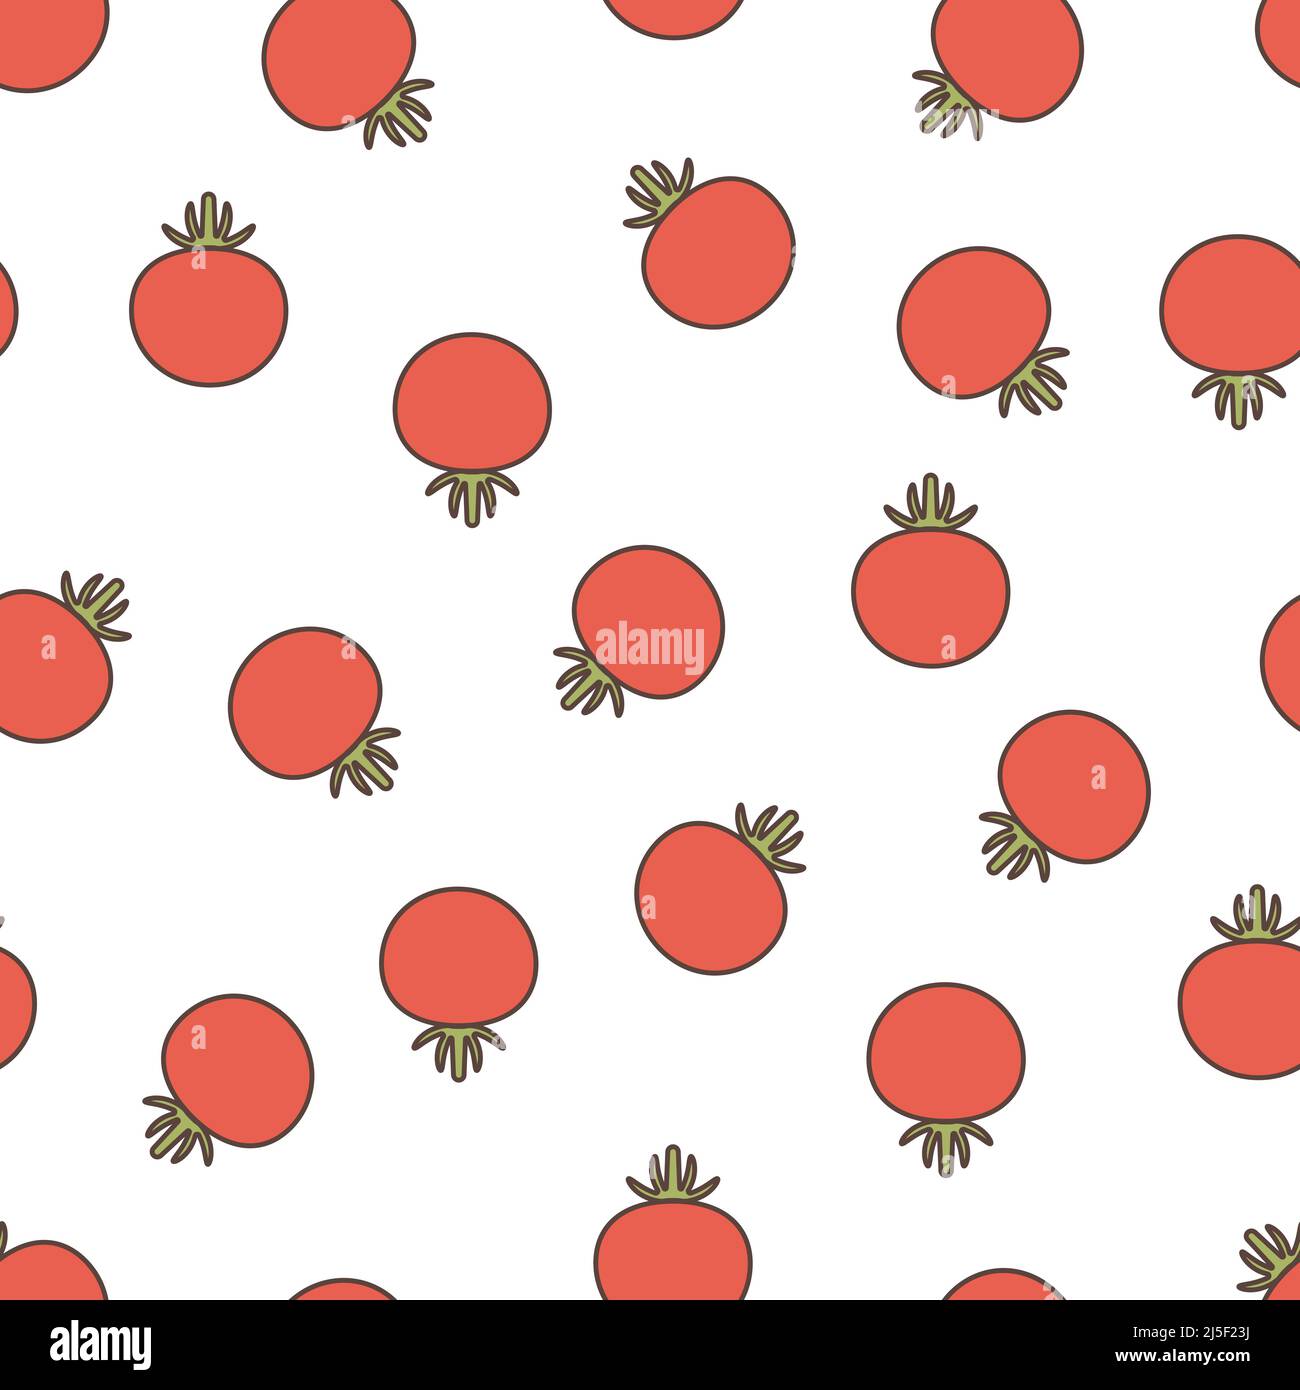 Seamless vegetable pattern with whole tomatoes Stock Vector